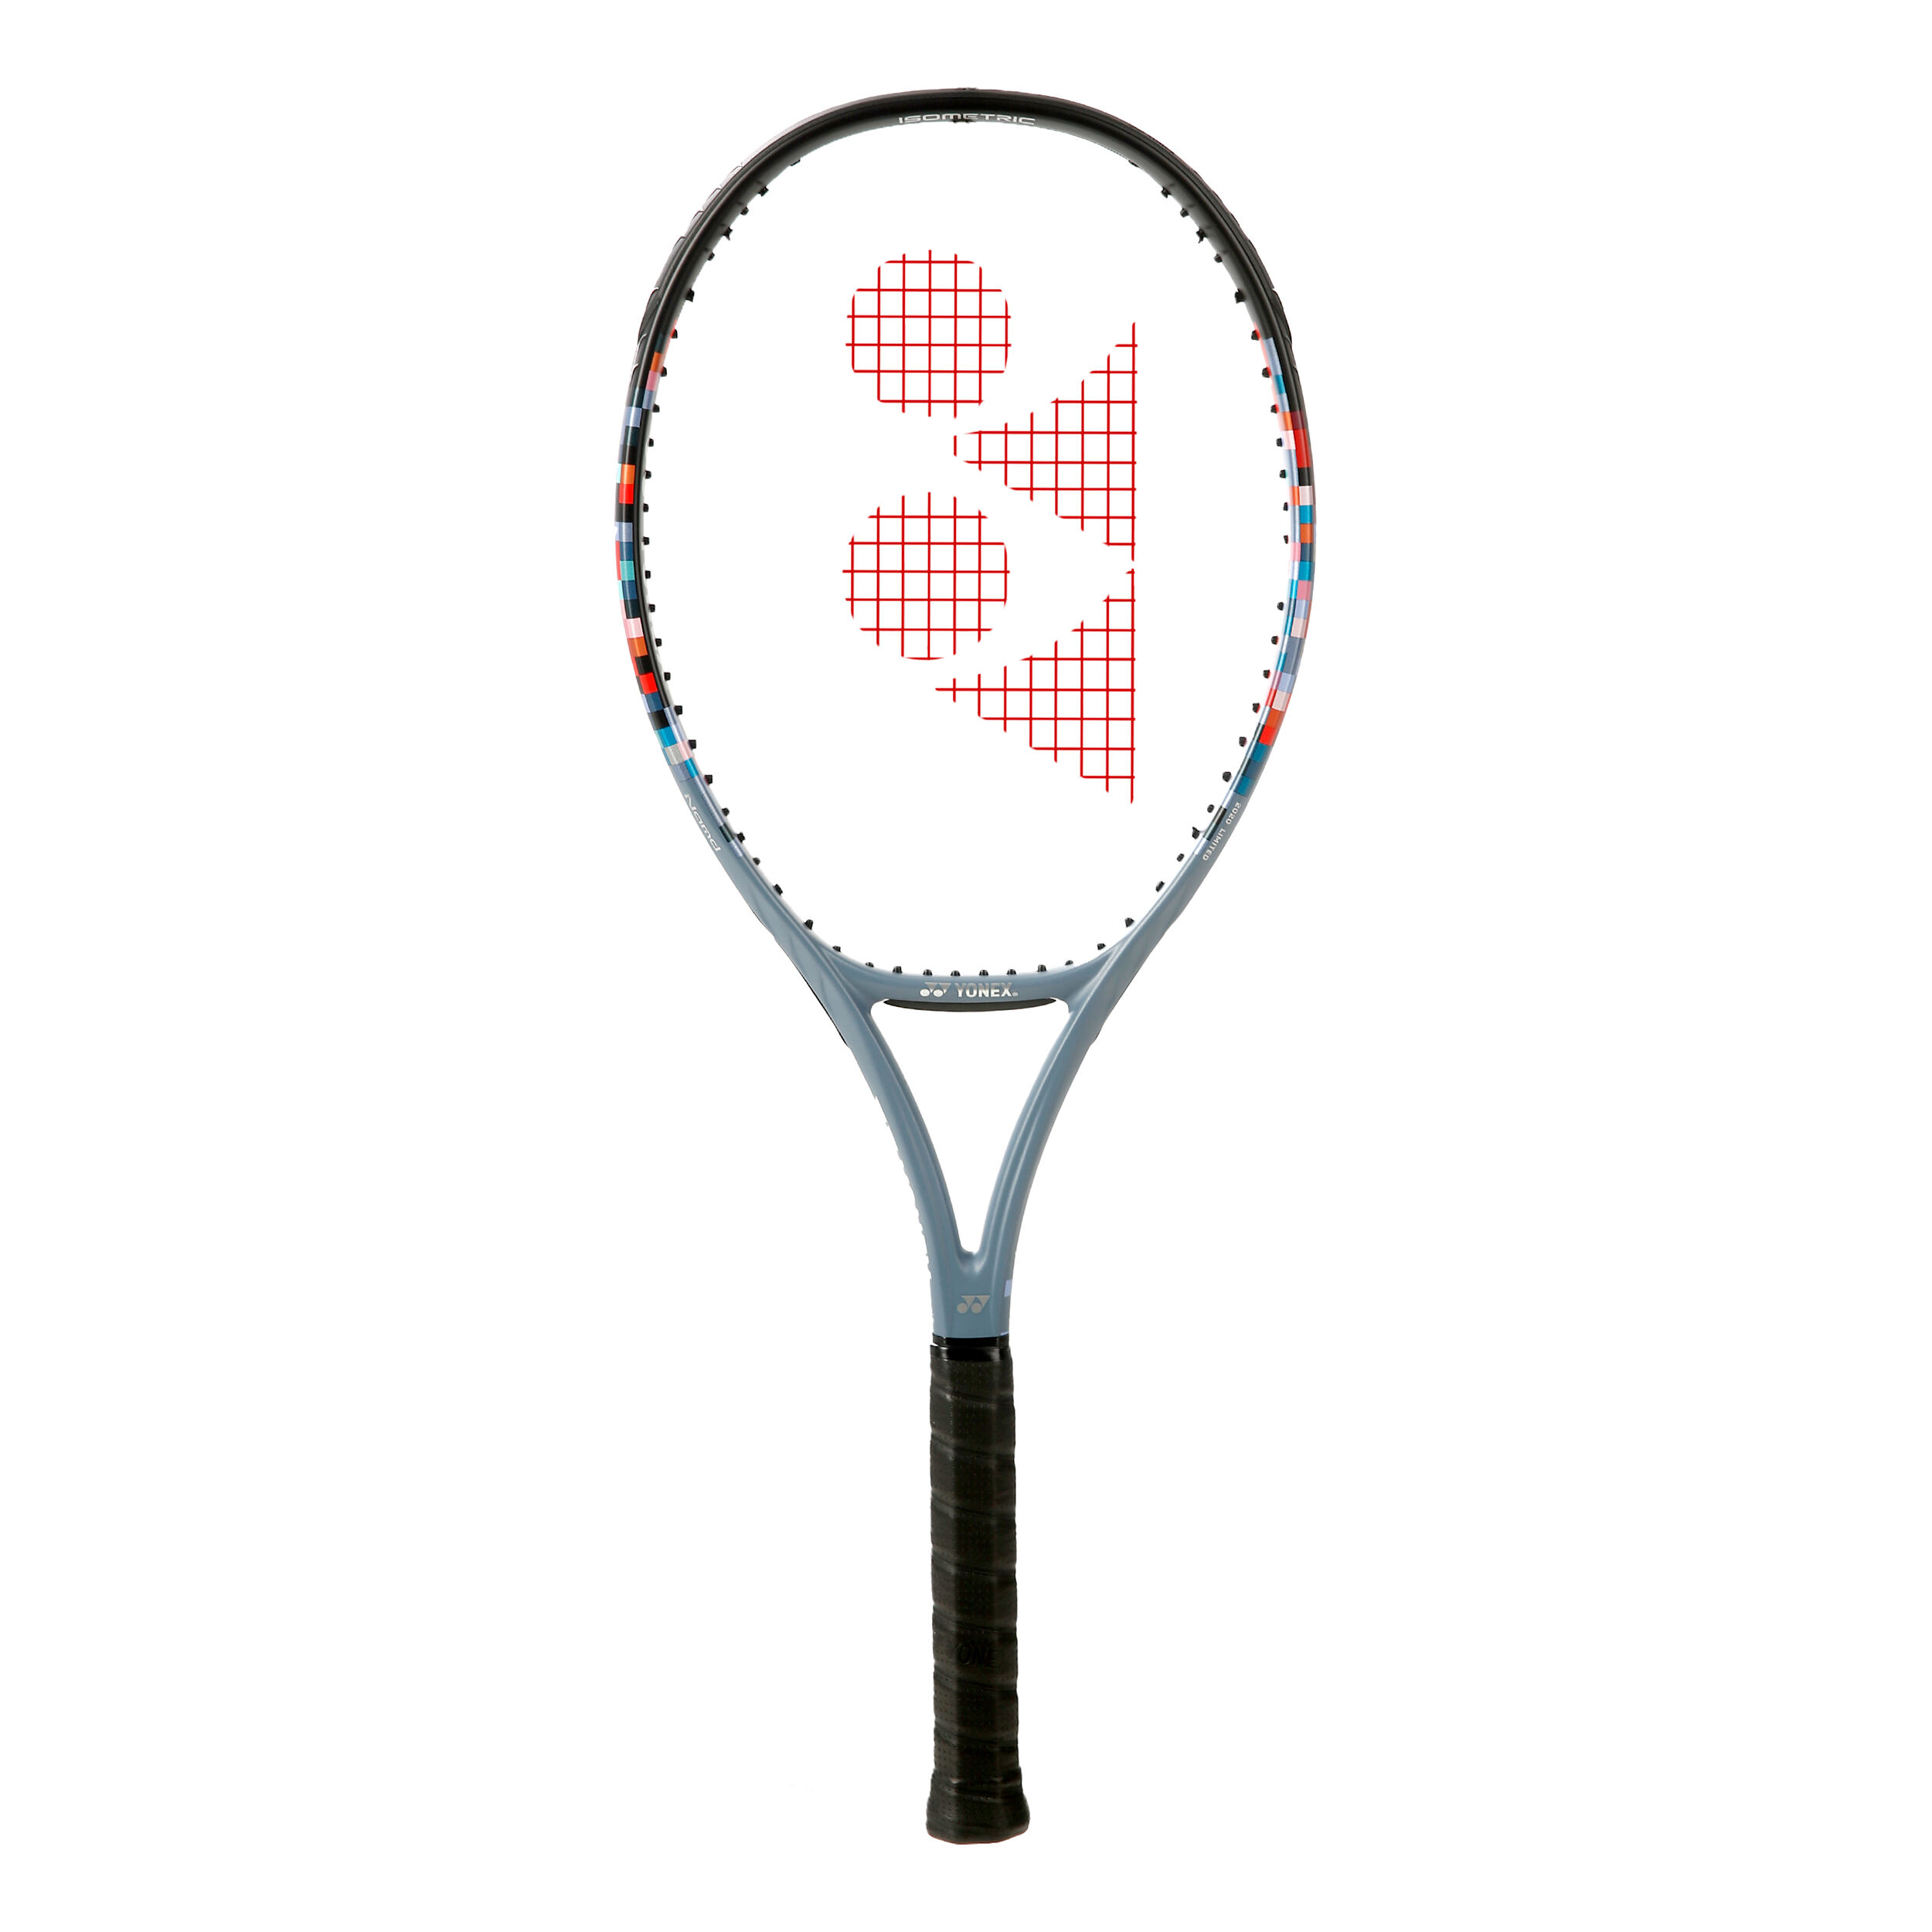 online | Tennis-Point buy Yonex VCORE 100 300g (Limited Edition)